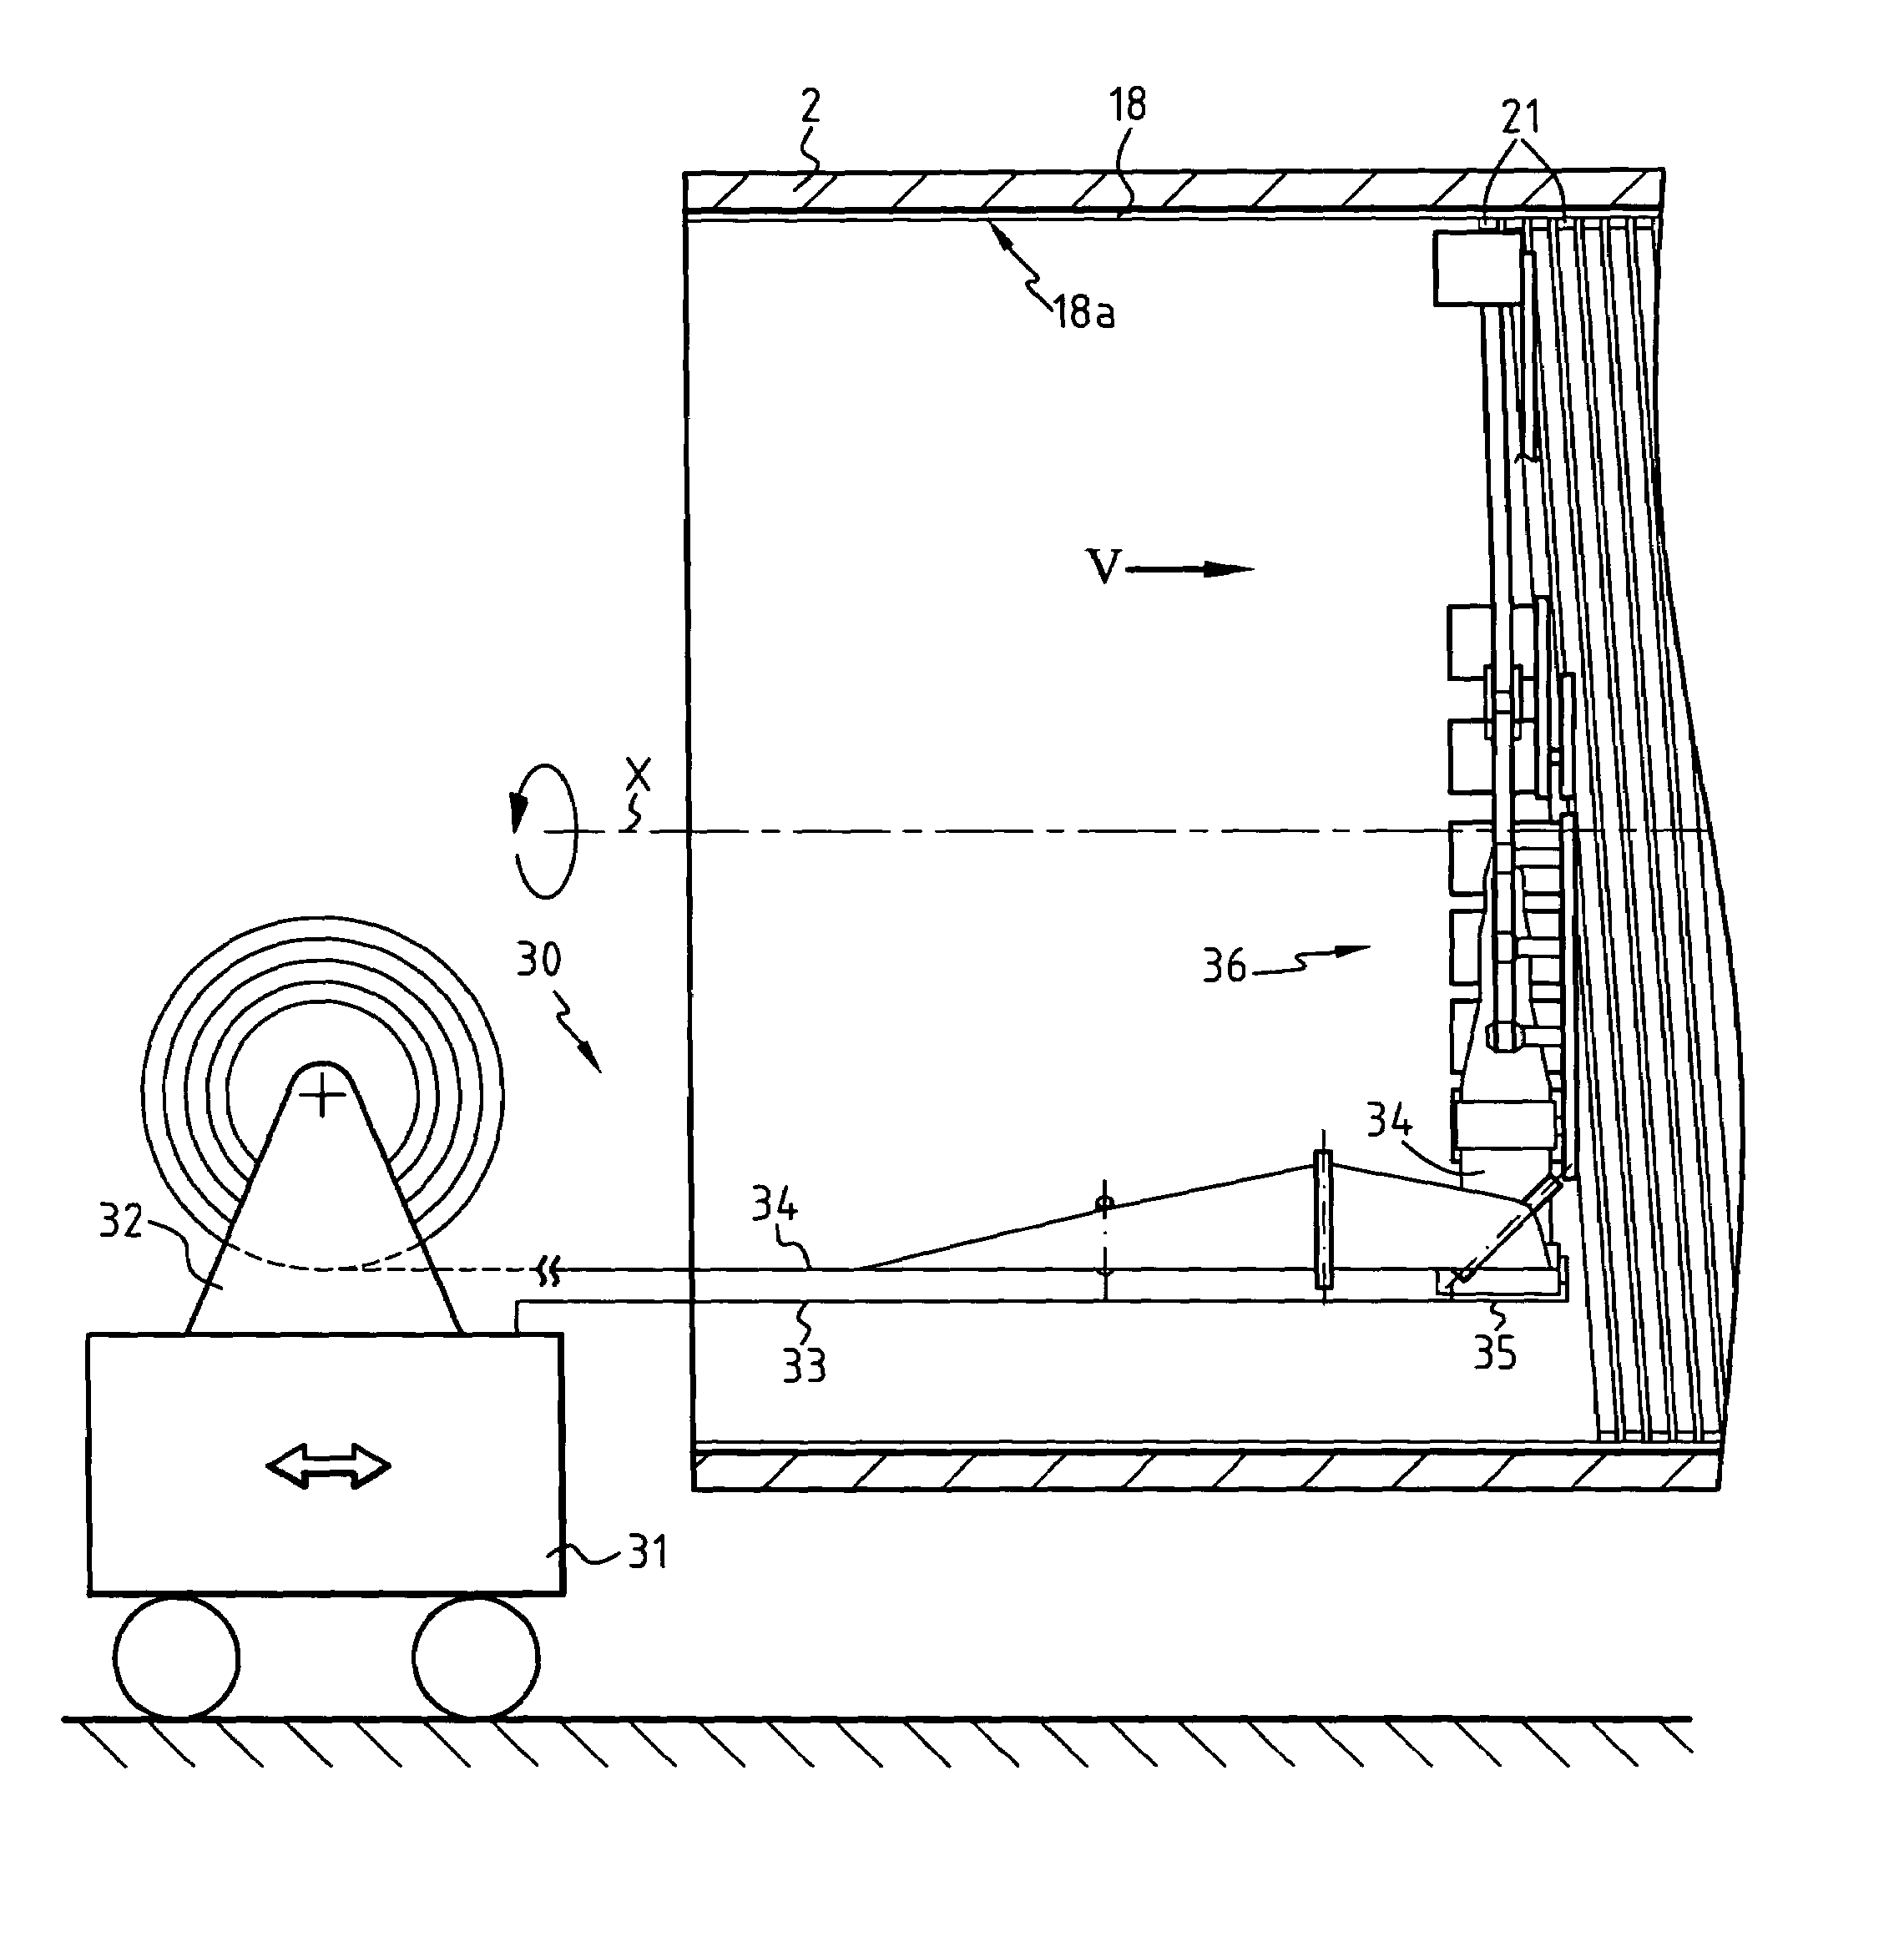 Method for making double-wall shells by centrifuging